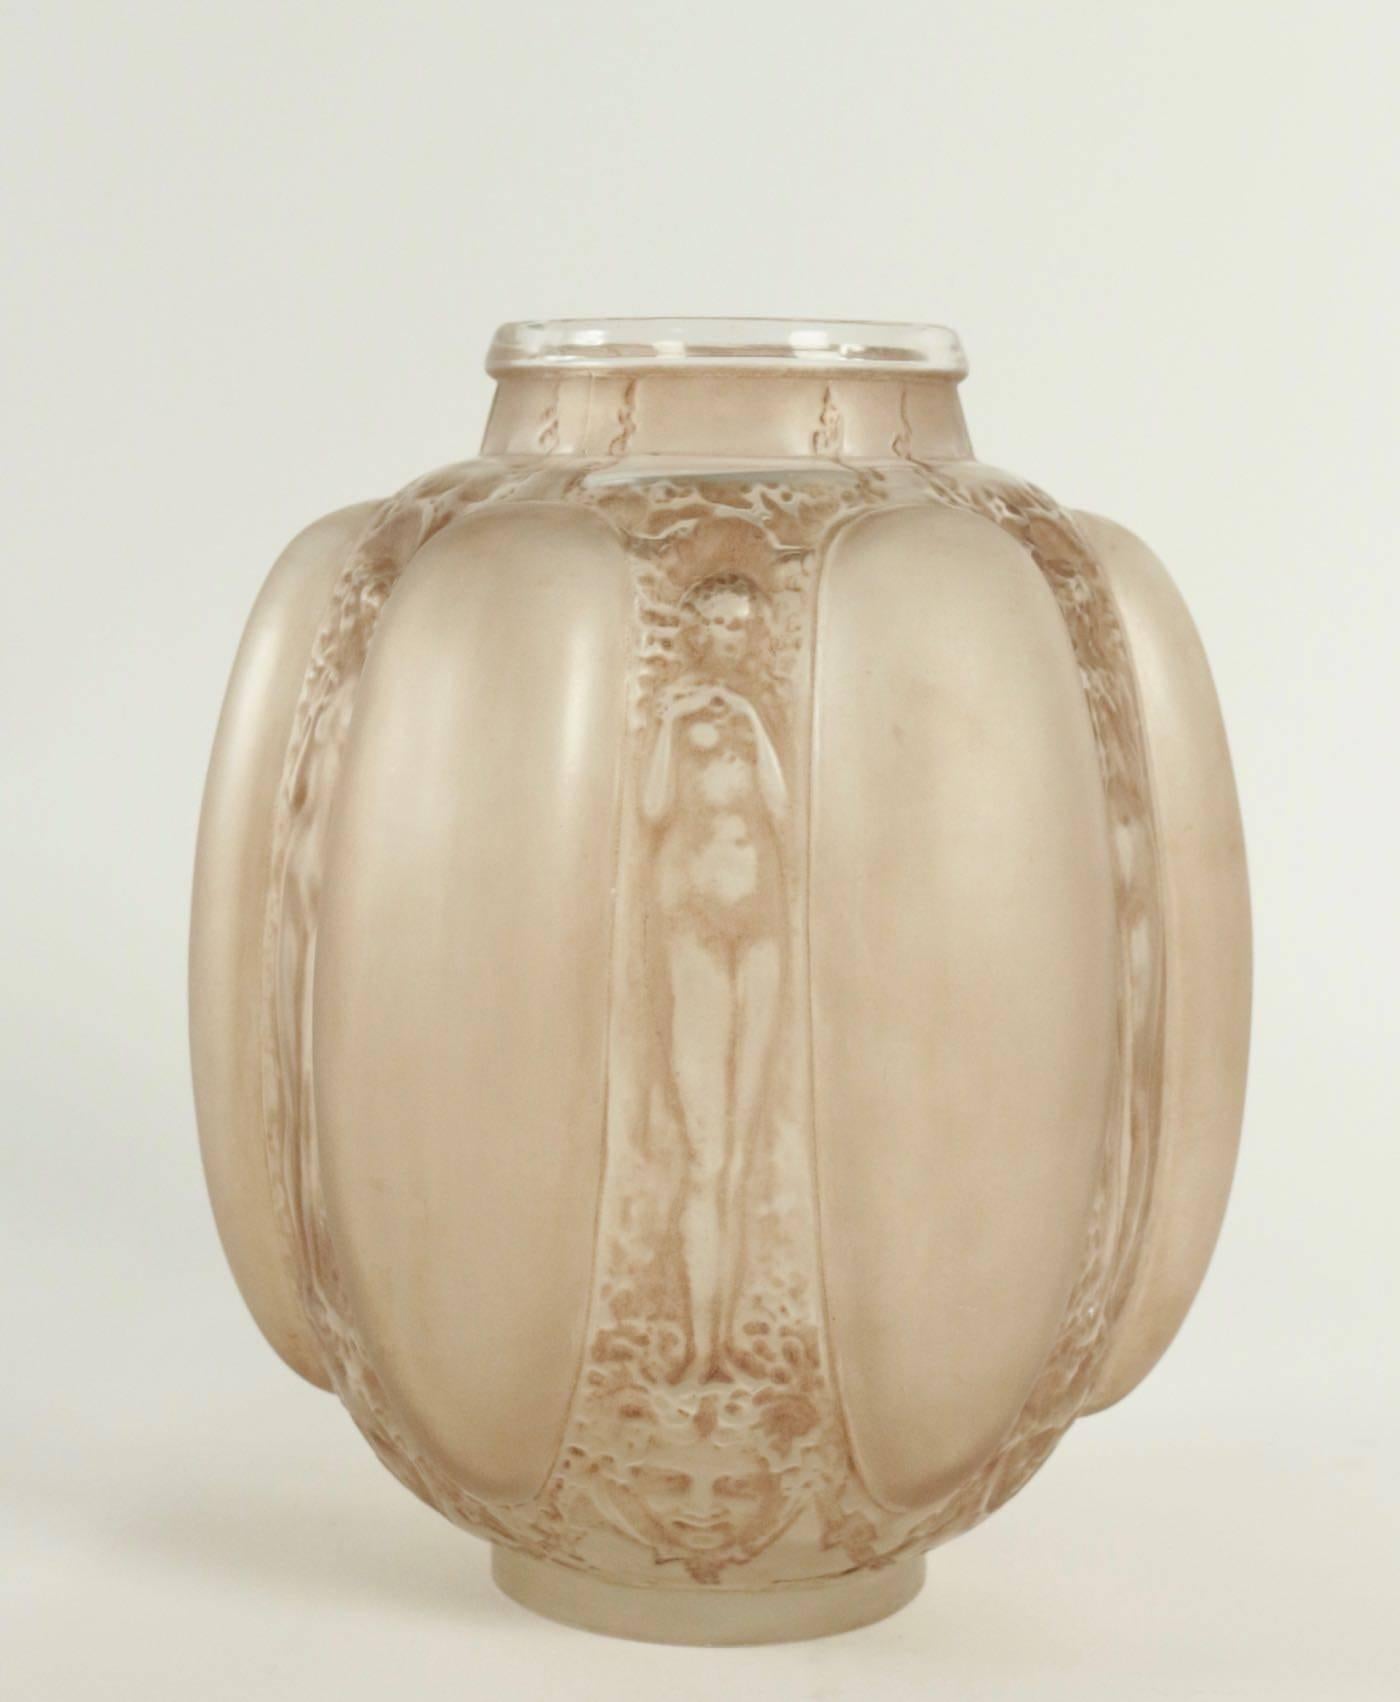 R Lalique vase six figurines et masques: frosted glass with six nude women standing above grotesque masks in between blown-out undecorated panels R. Lalique Vase with the great early signature on the outside of the base.
Ref Marcilhac: Model: 886,